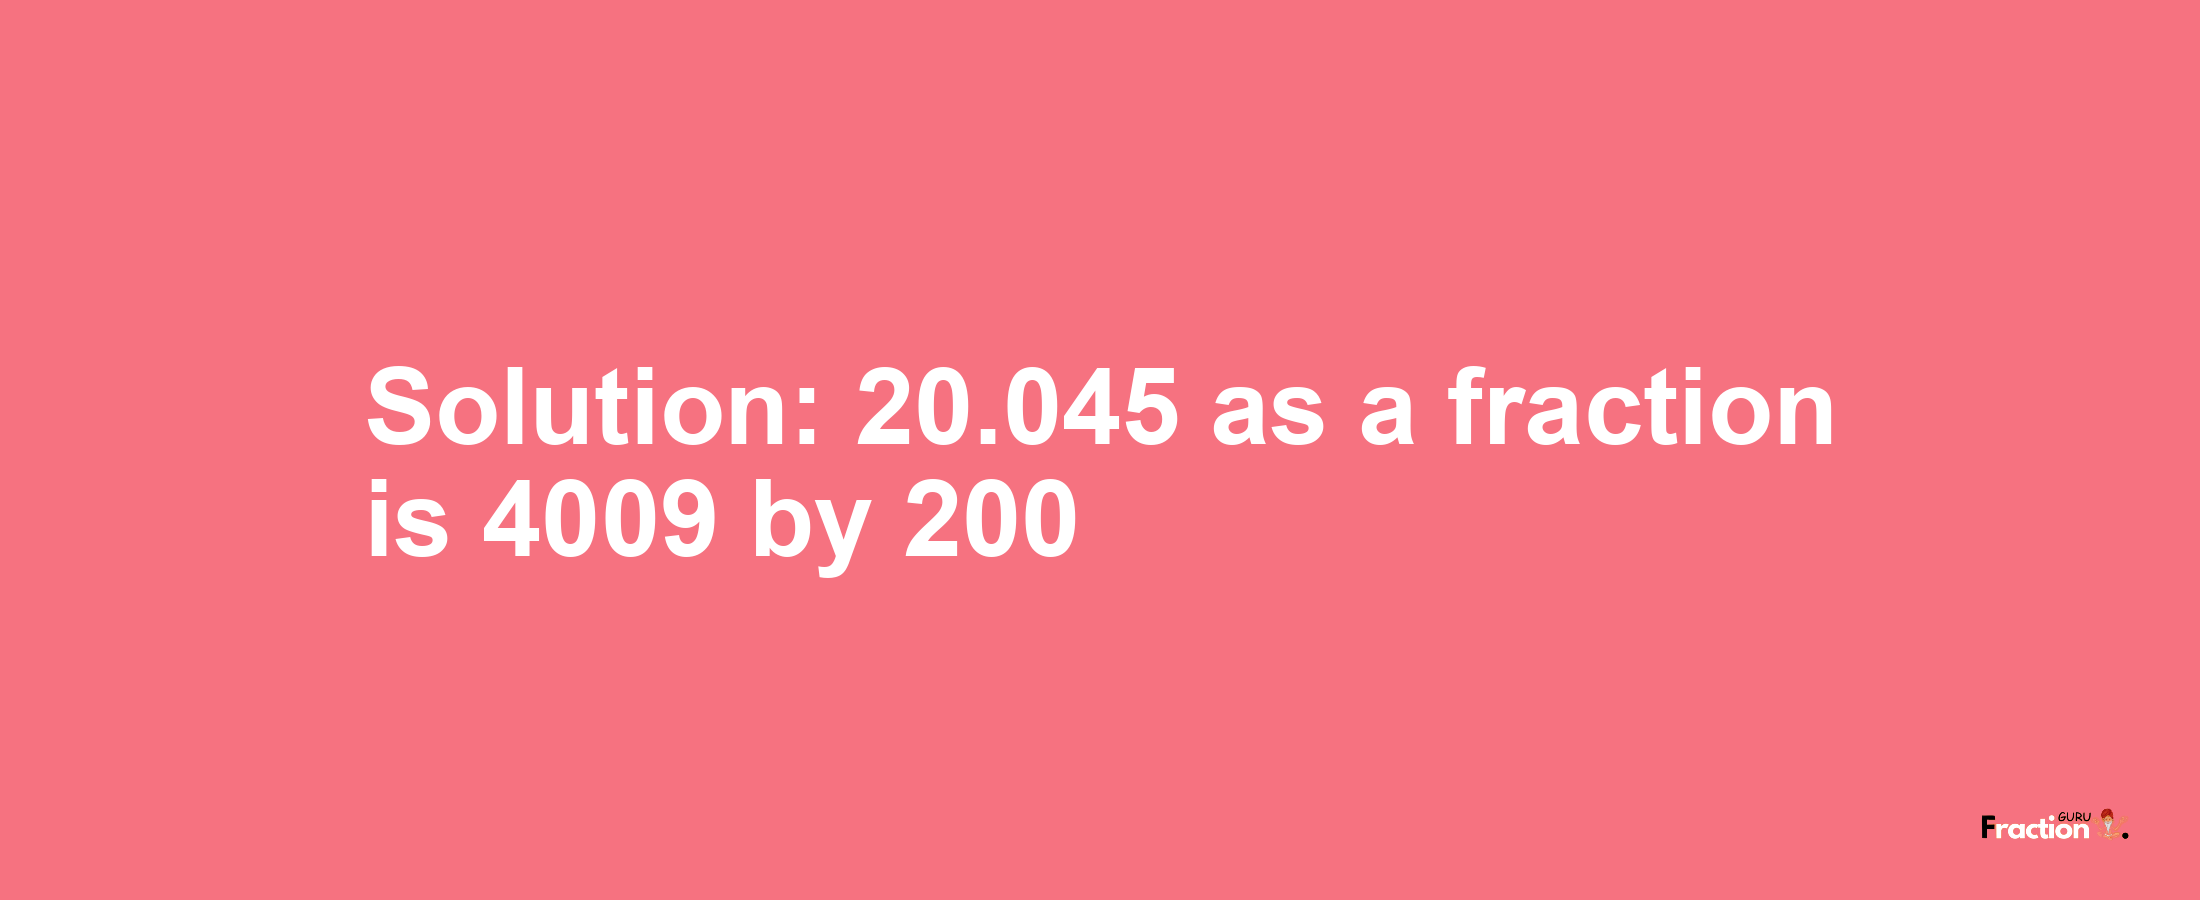 Solution:20.045 as a fraction is 4009/200